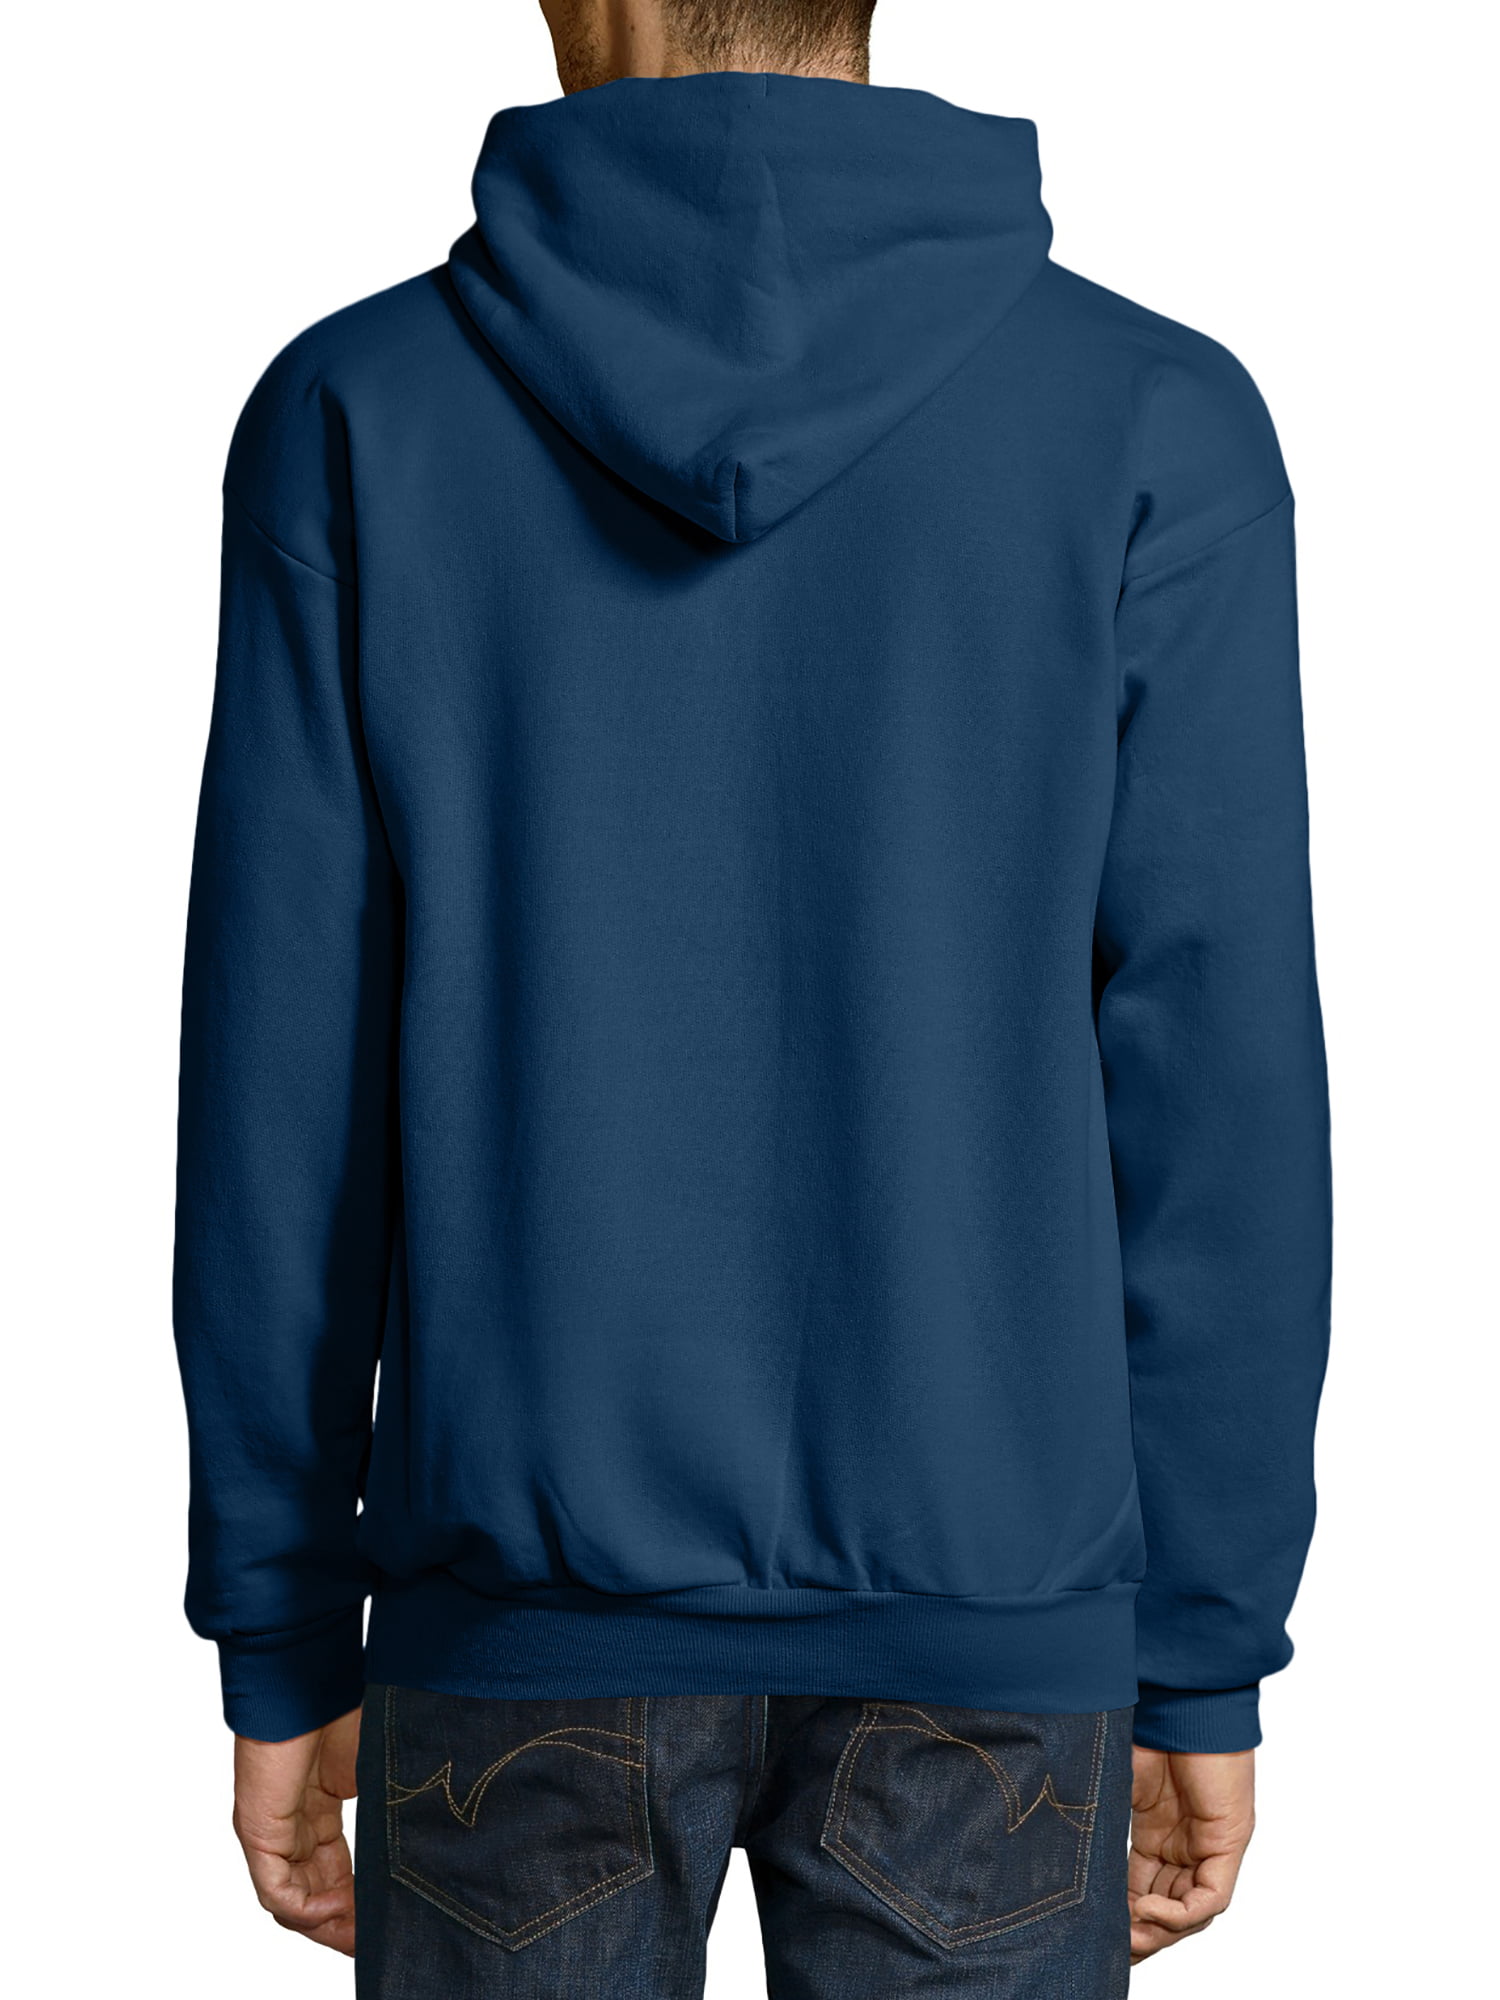 Hanes Youth Hoodie Size Chart